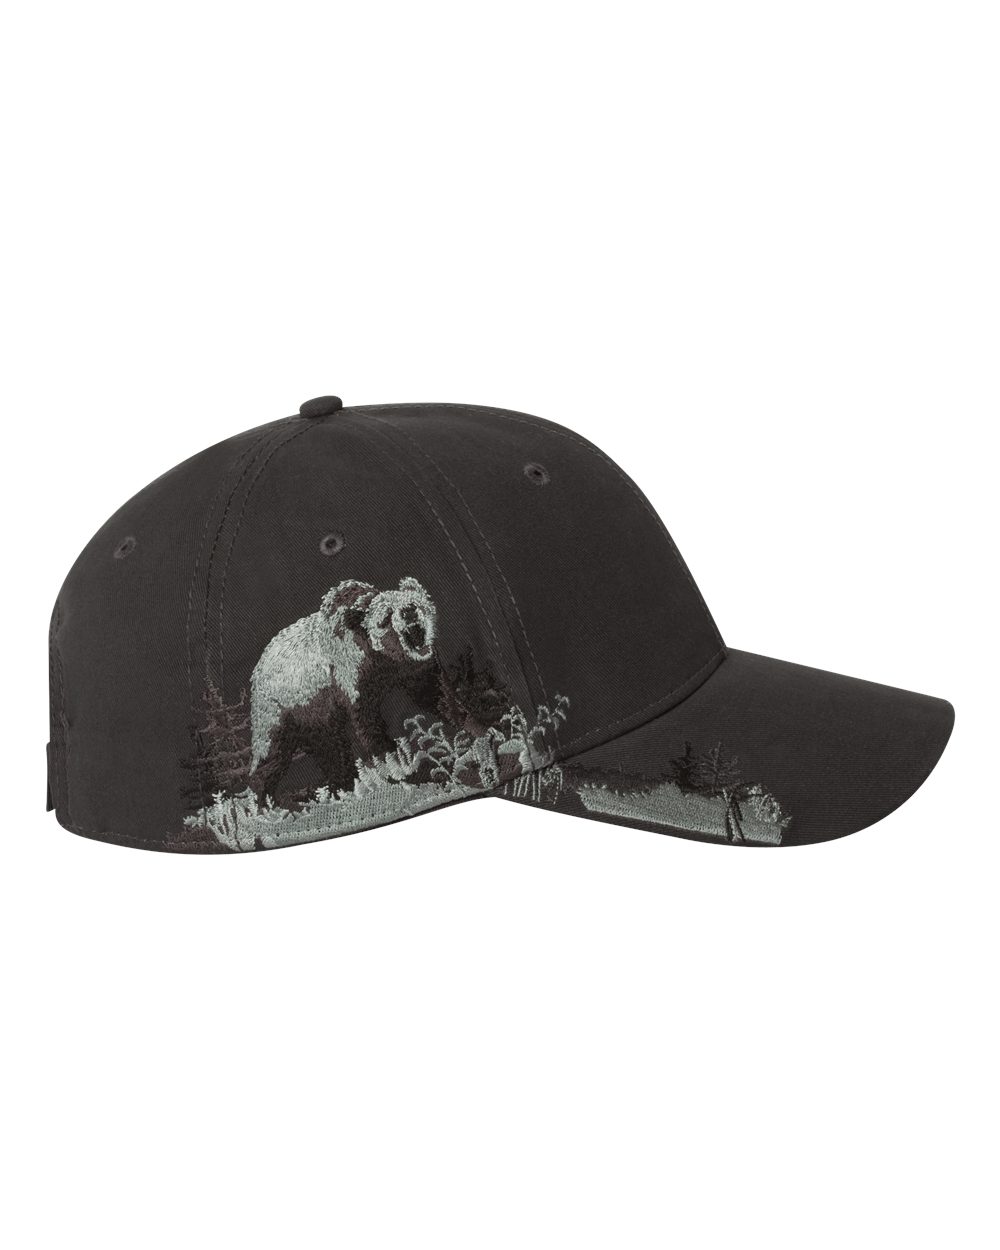 DRI DUCK Grizzly Bear Brushed Twill Cap - 3319